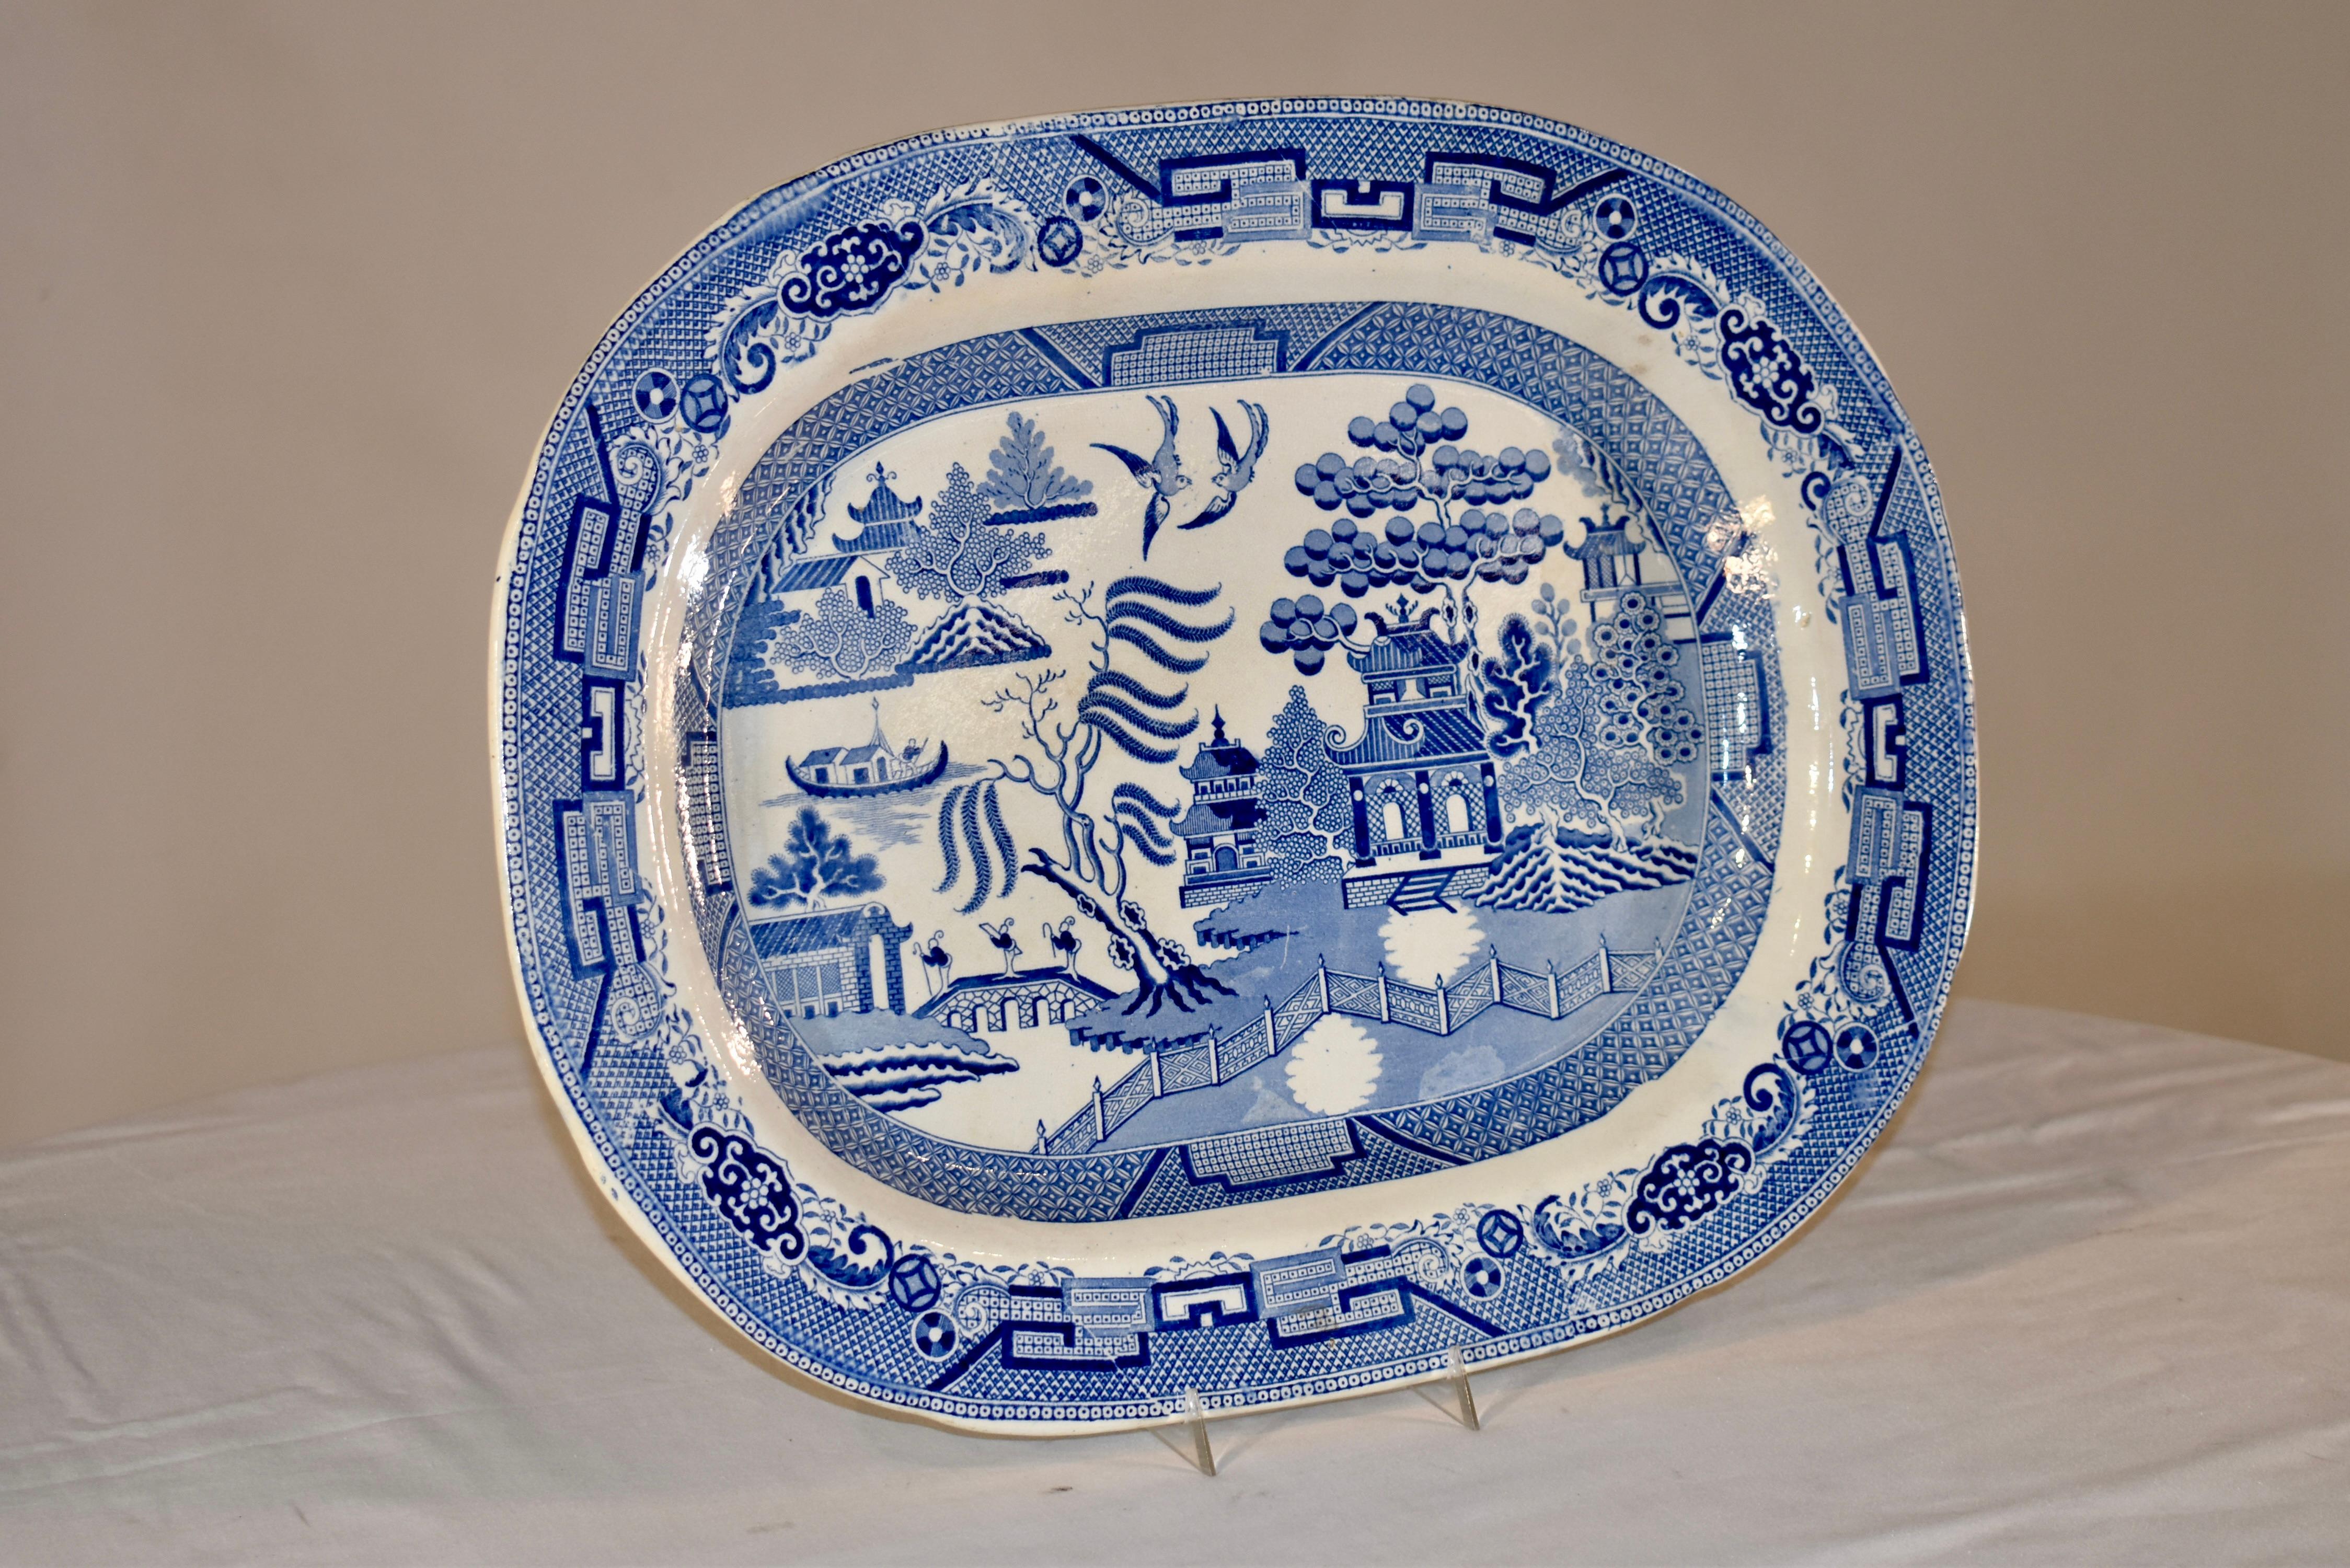 19th century English transfer ware platter in the highly collectible 